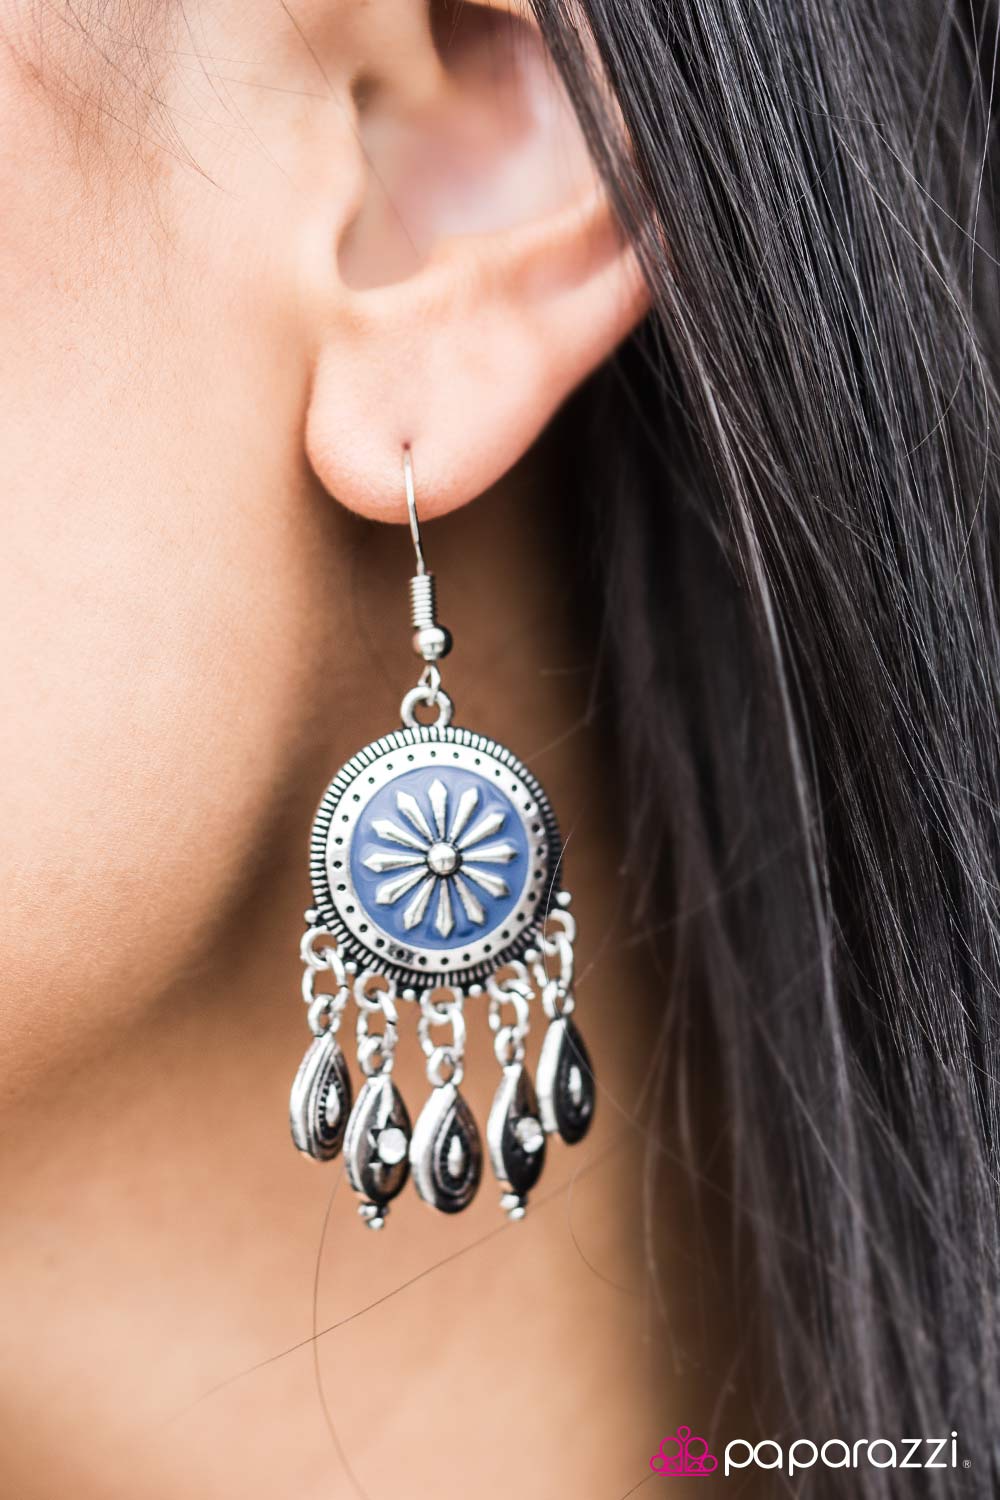 Once Upon A CHIME - Blue - Paparazzi earrings